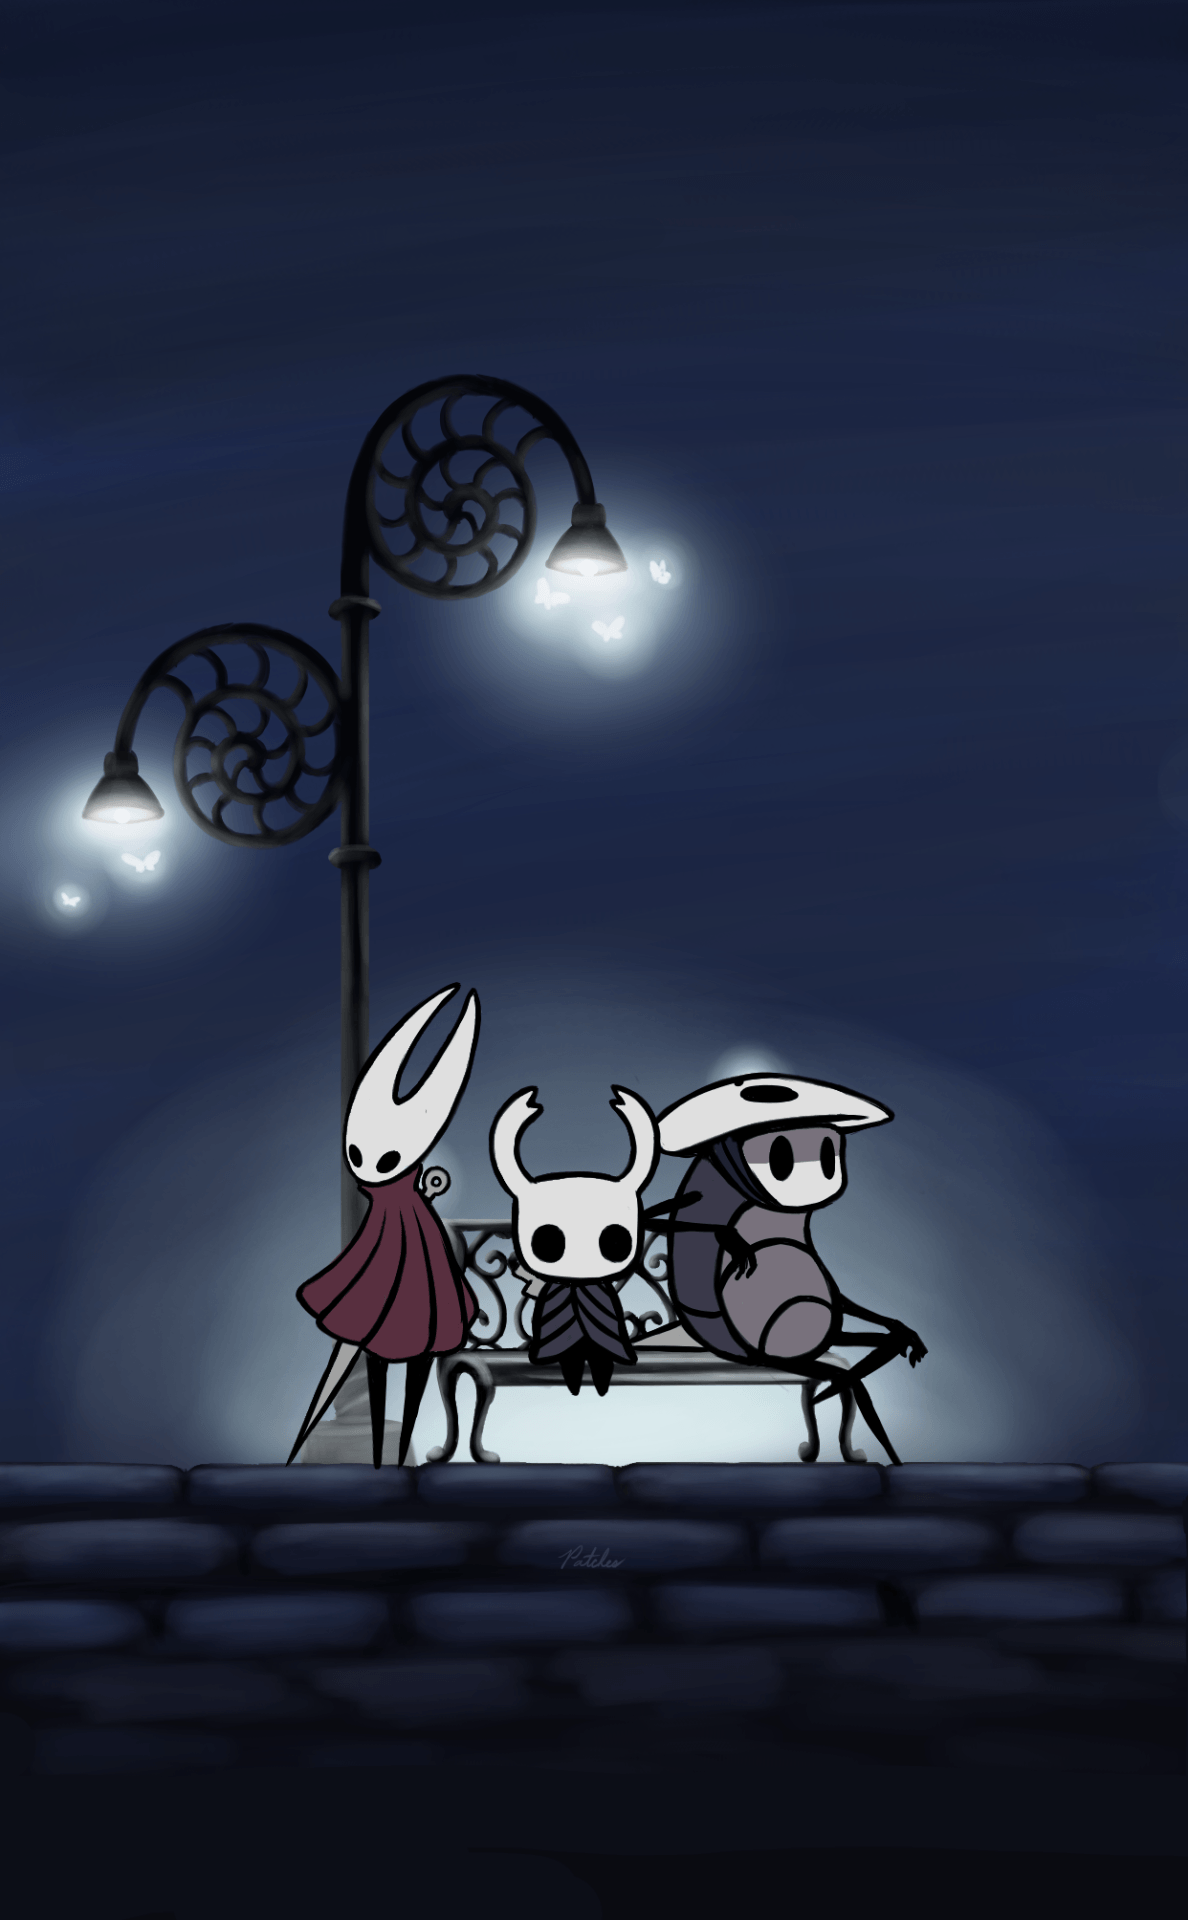 hornet and hollow knight wallpapers